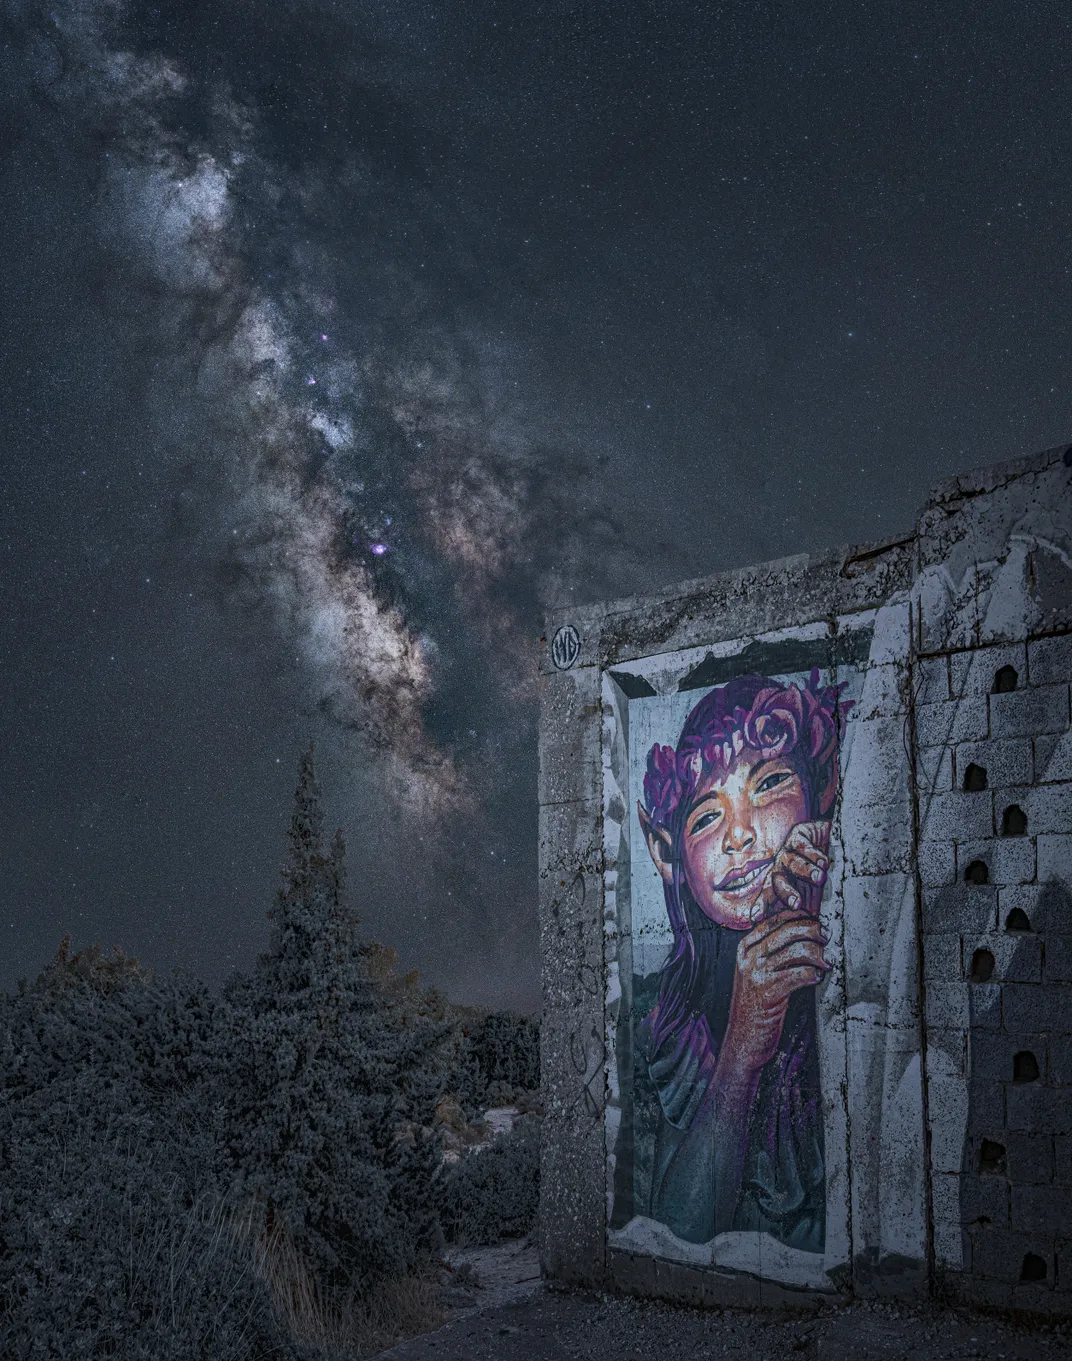 the milky way stretches across the sky, with a painting of a young woman with a purple crown of flowers in the foreground on a wall of a ruin